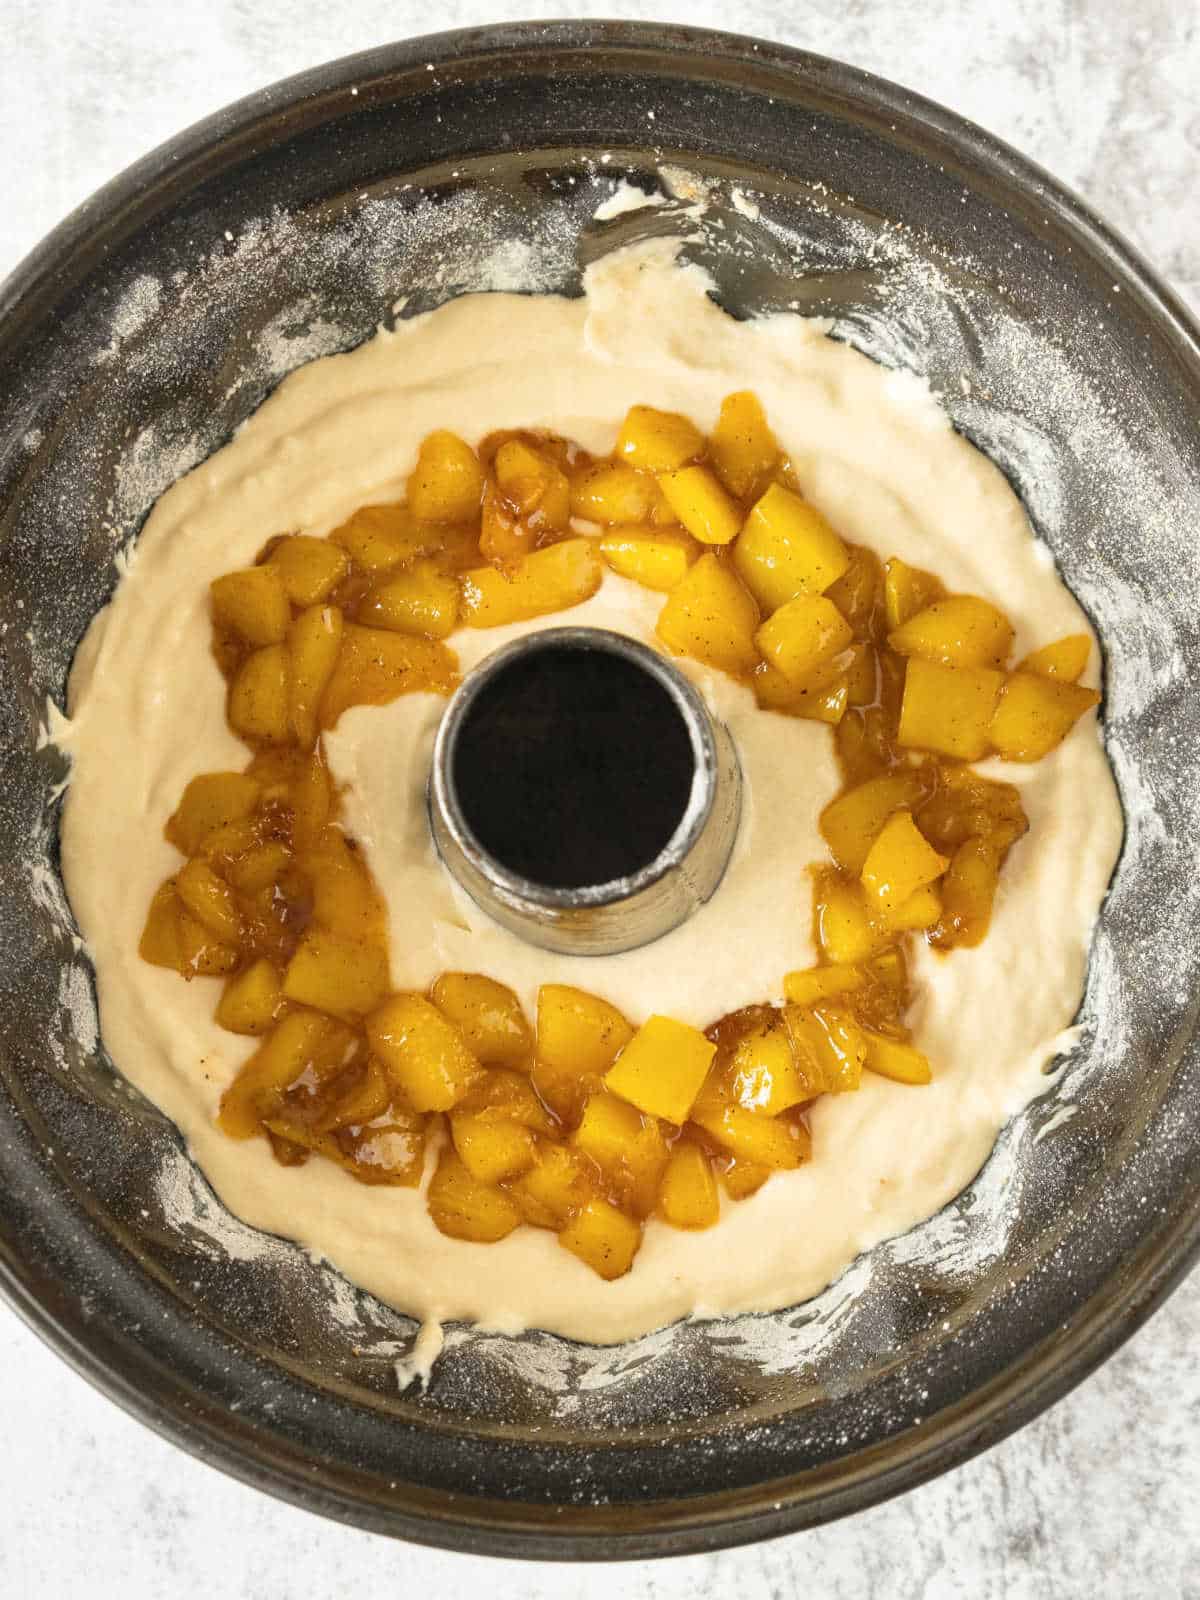 Assembling a coconut bundt cake with mango in the middle. Black cake pan. Grey surface.